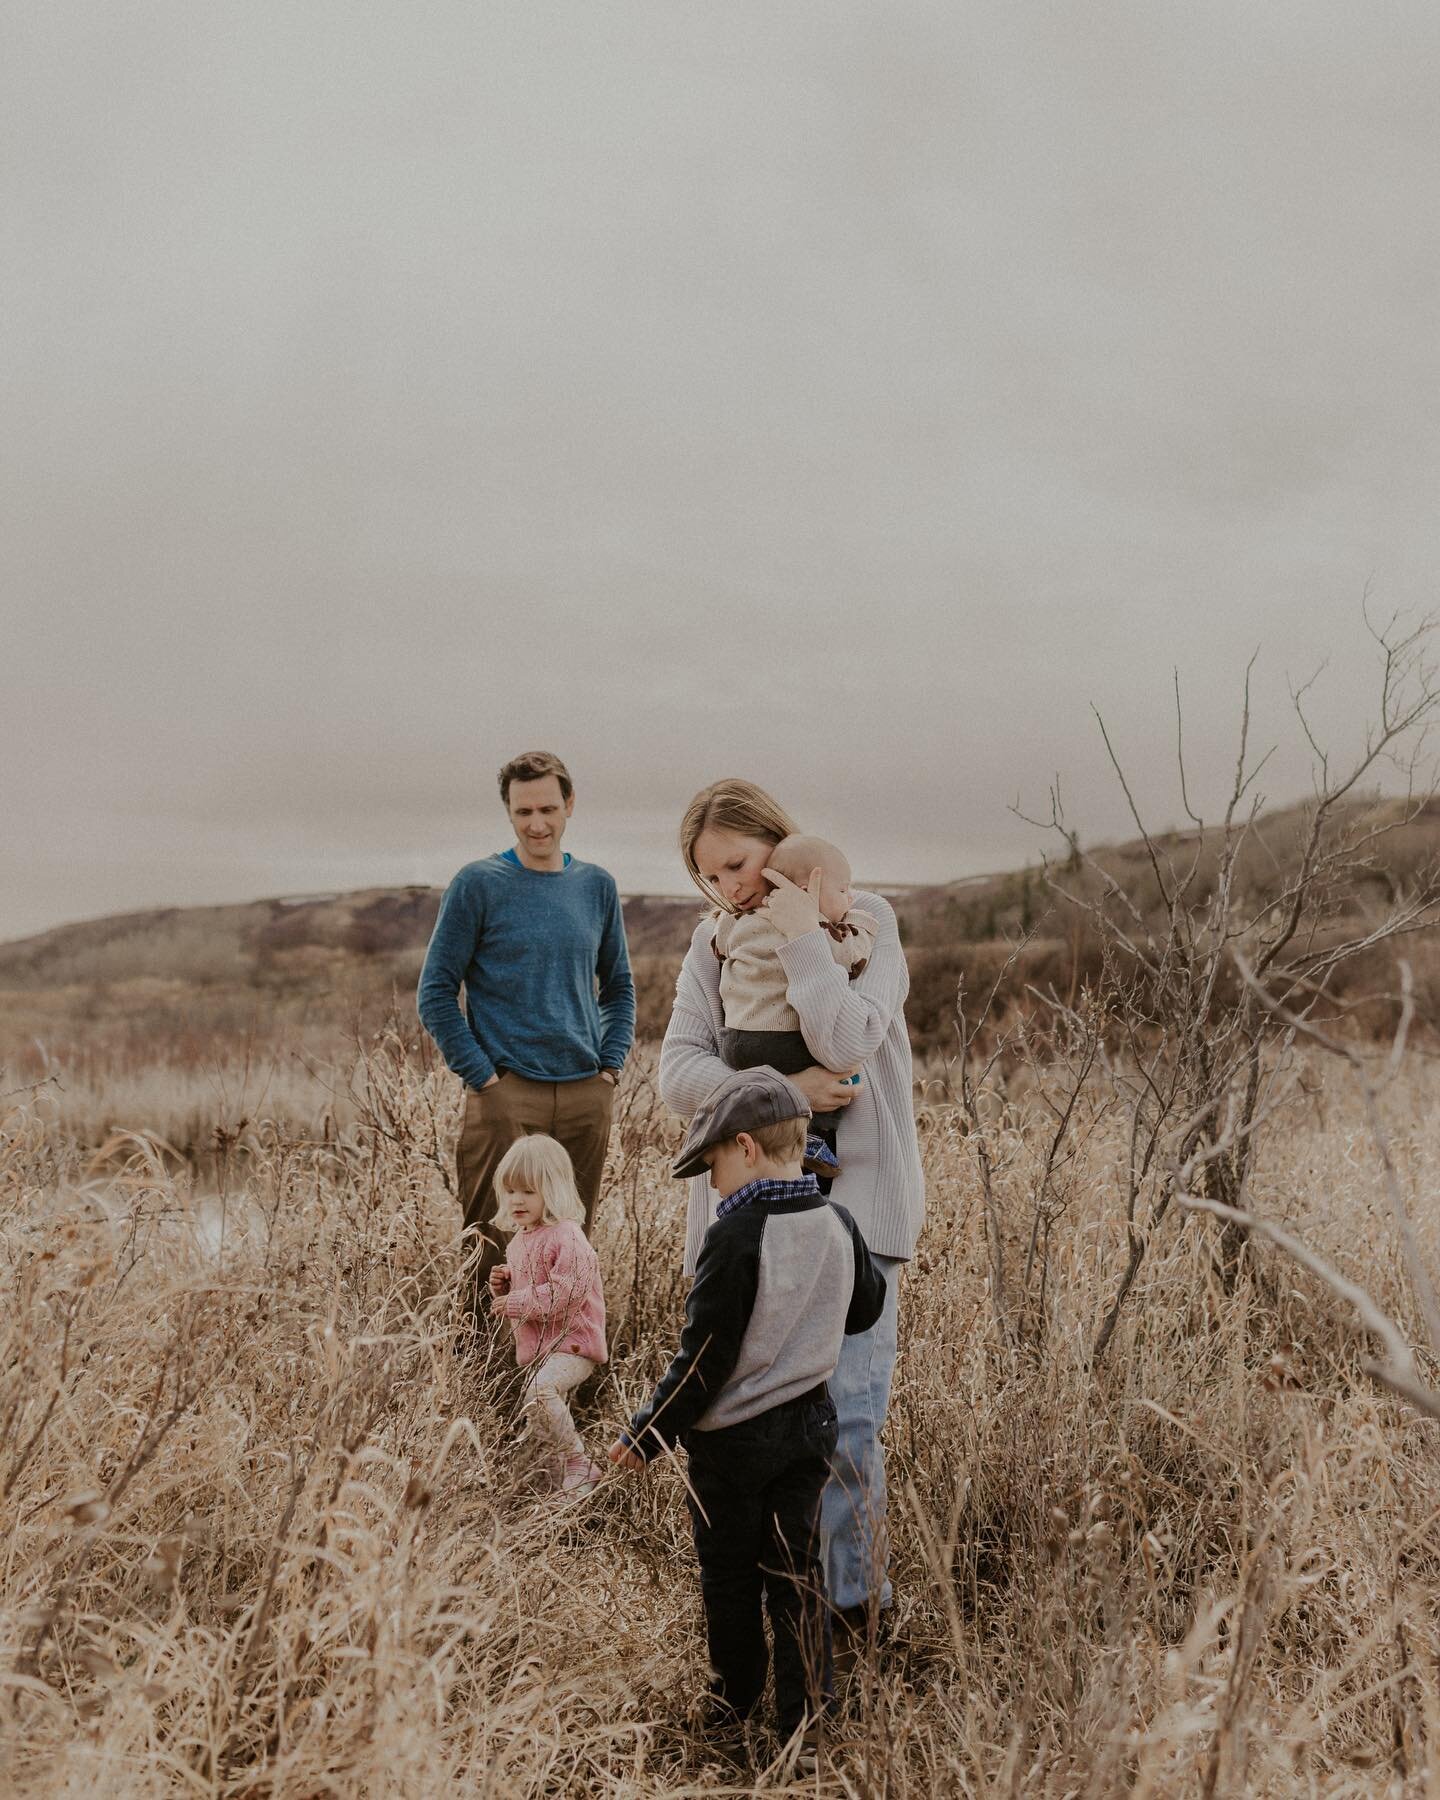 I have been photographing this family since their wedding back in 2016 and it is one of the absolute joys of my life and of my career to know them and watch them grow.